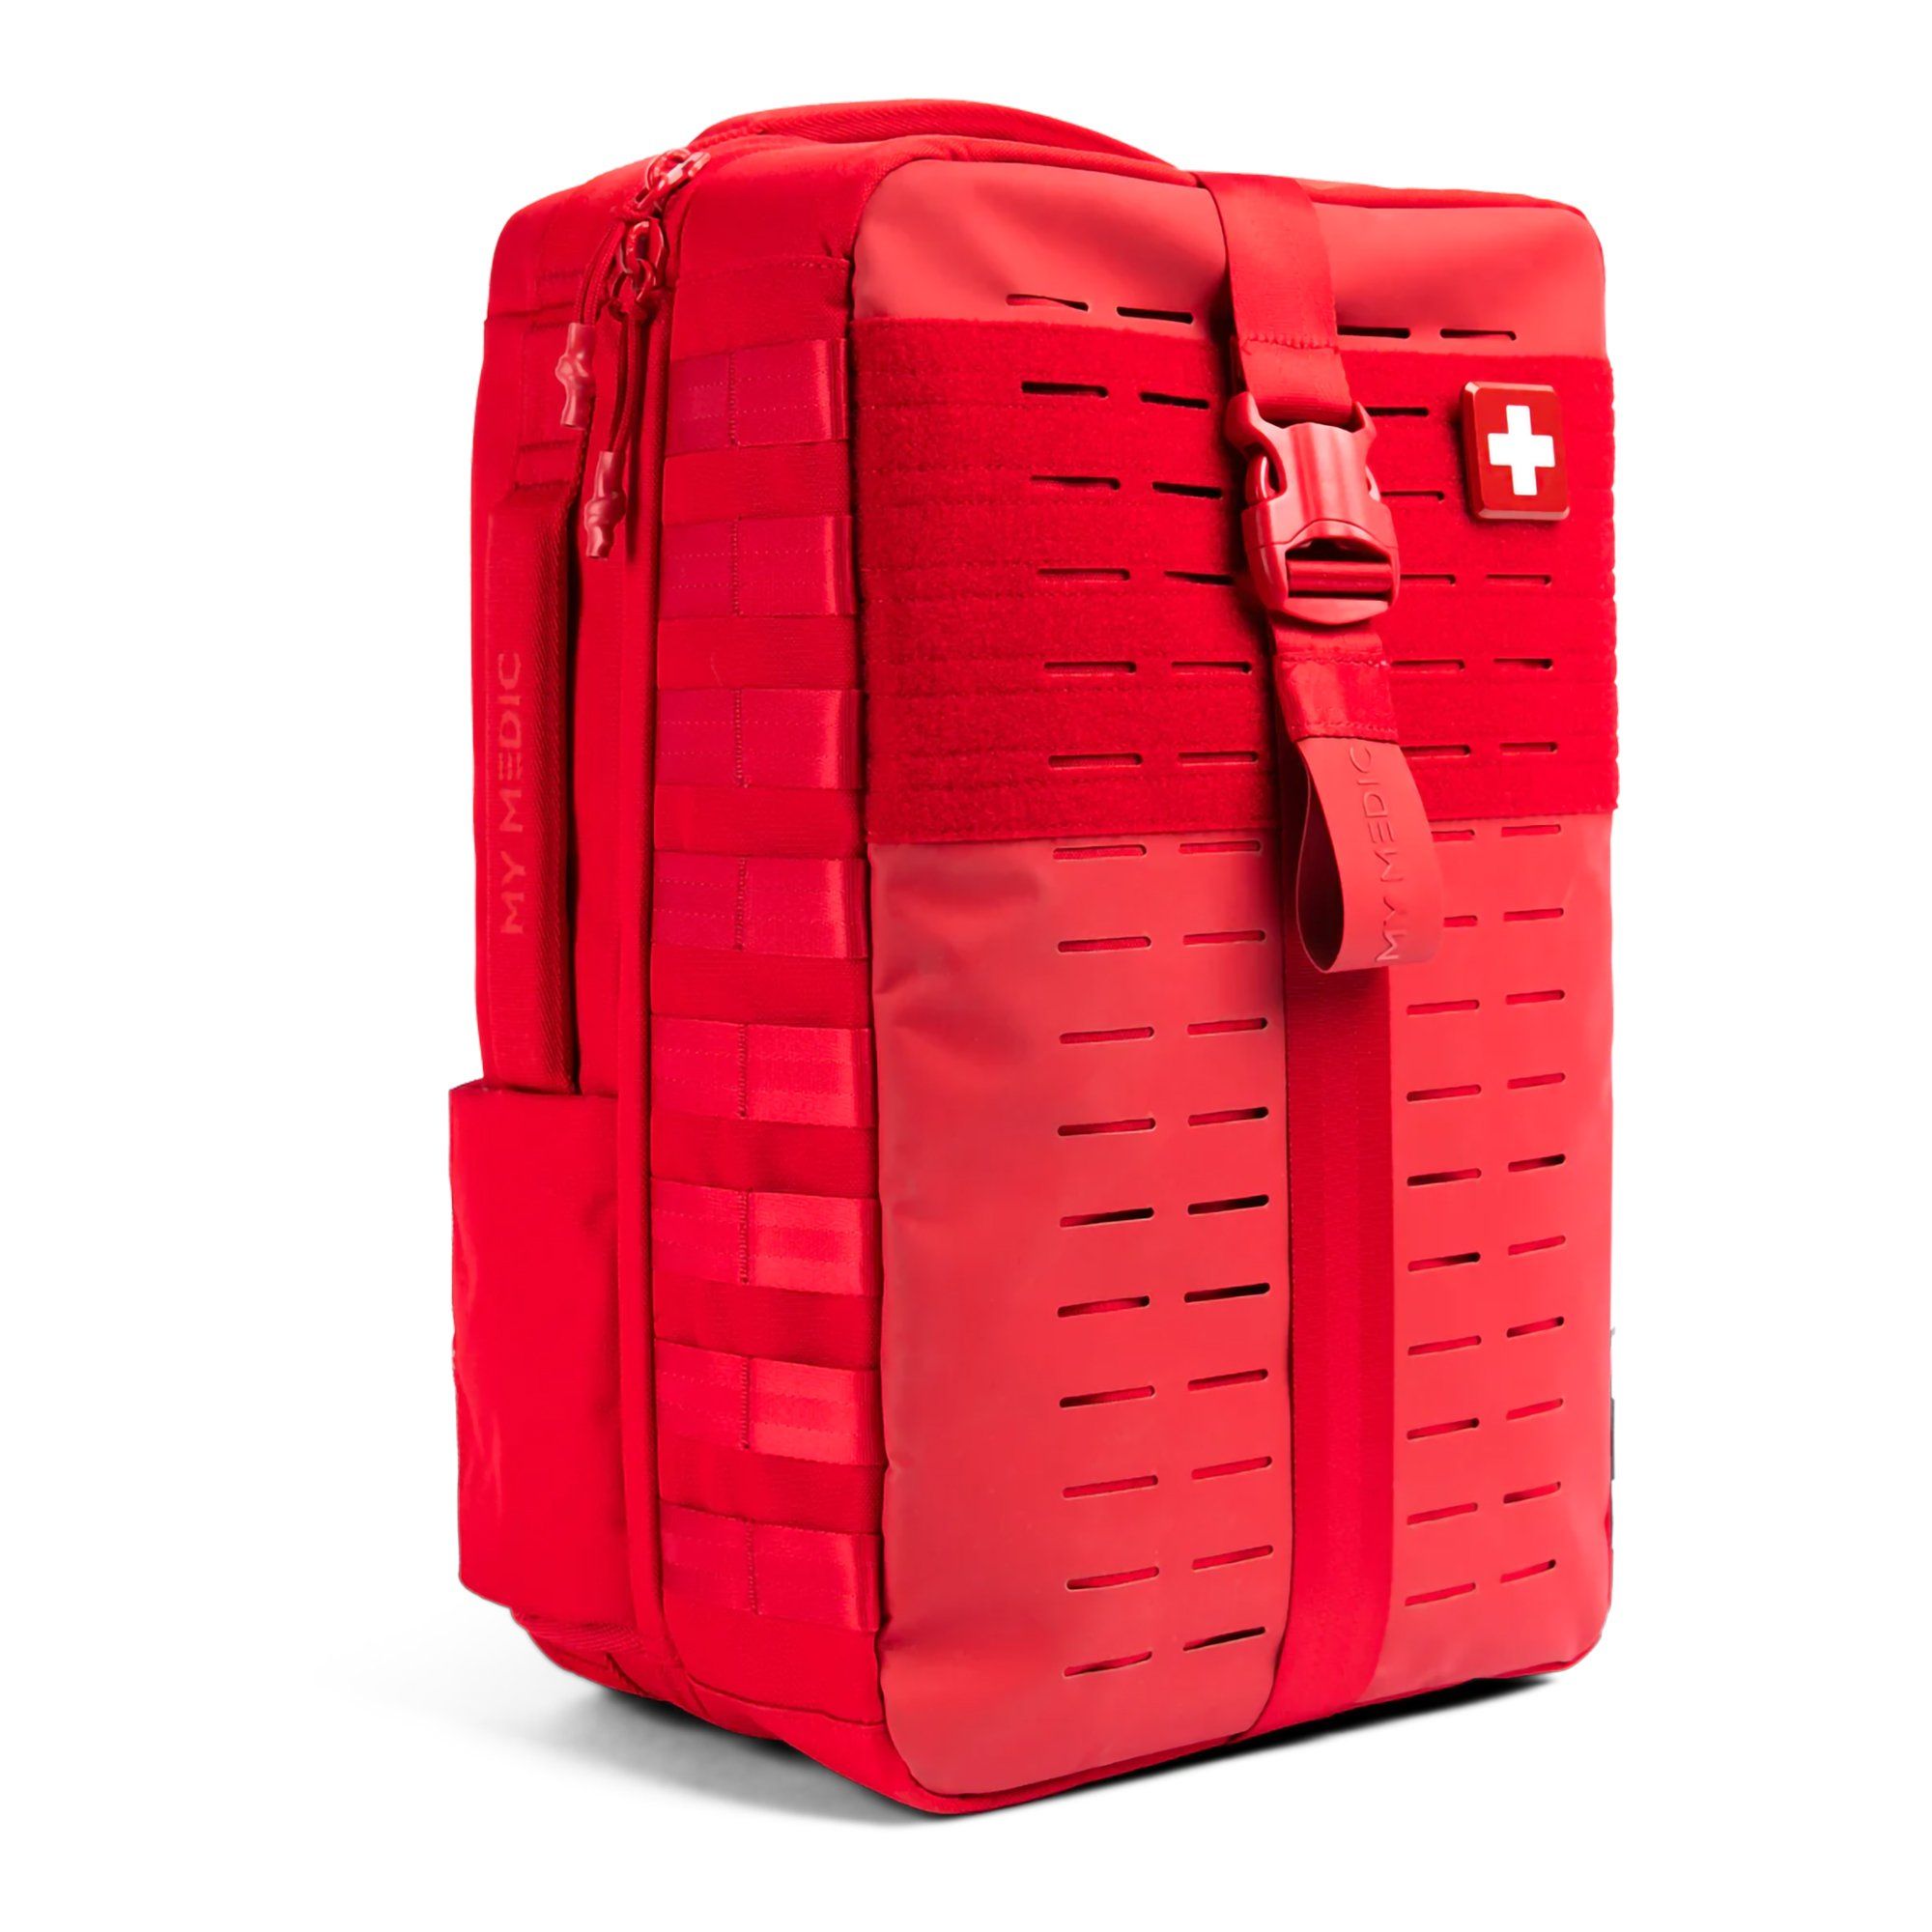 My Medic - SCOUT Portable Medical First Aid Kit - Red